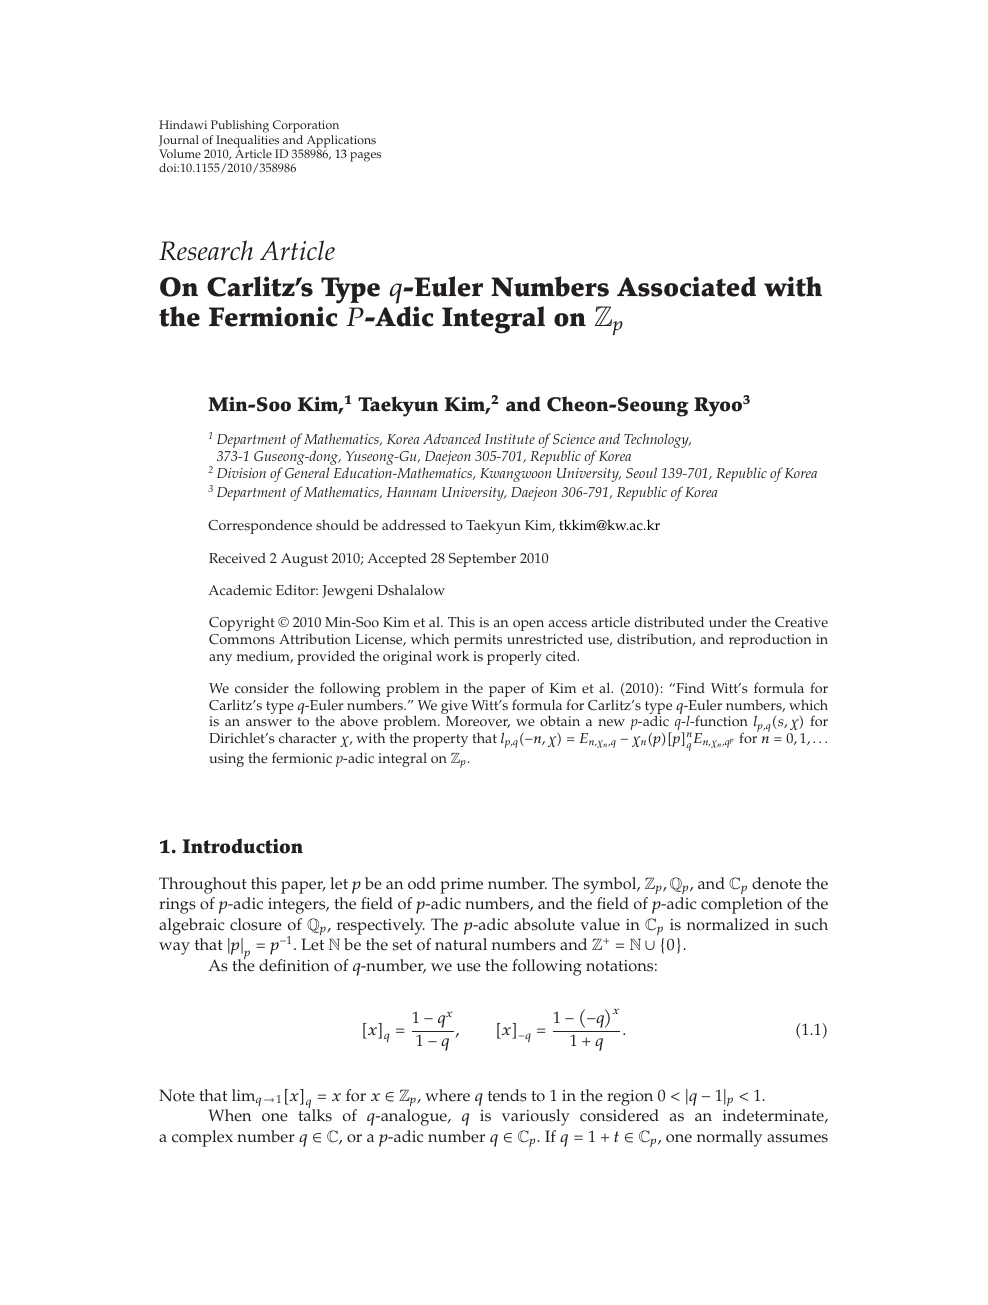 On Carlitz S Type Euler Numbers Associated With The Fermionic Adic Integral On Topic Of Research Paper In Mathematics Download Scholarly Article Pdf And Read For Free On Cyberleninka Open Science Hub